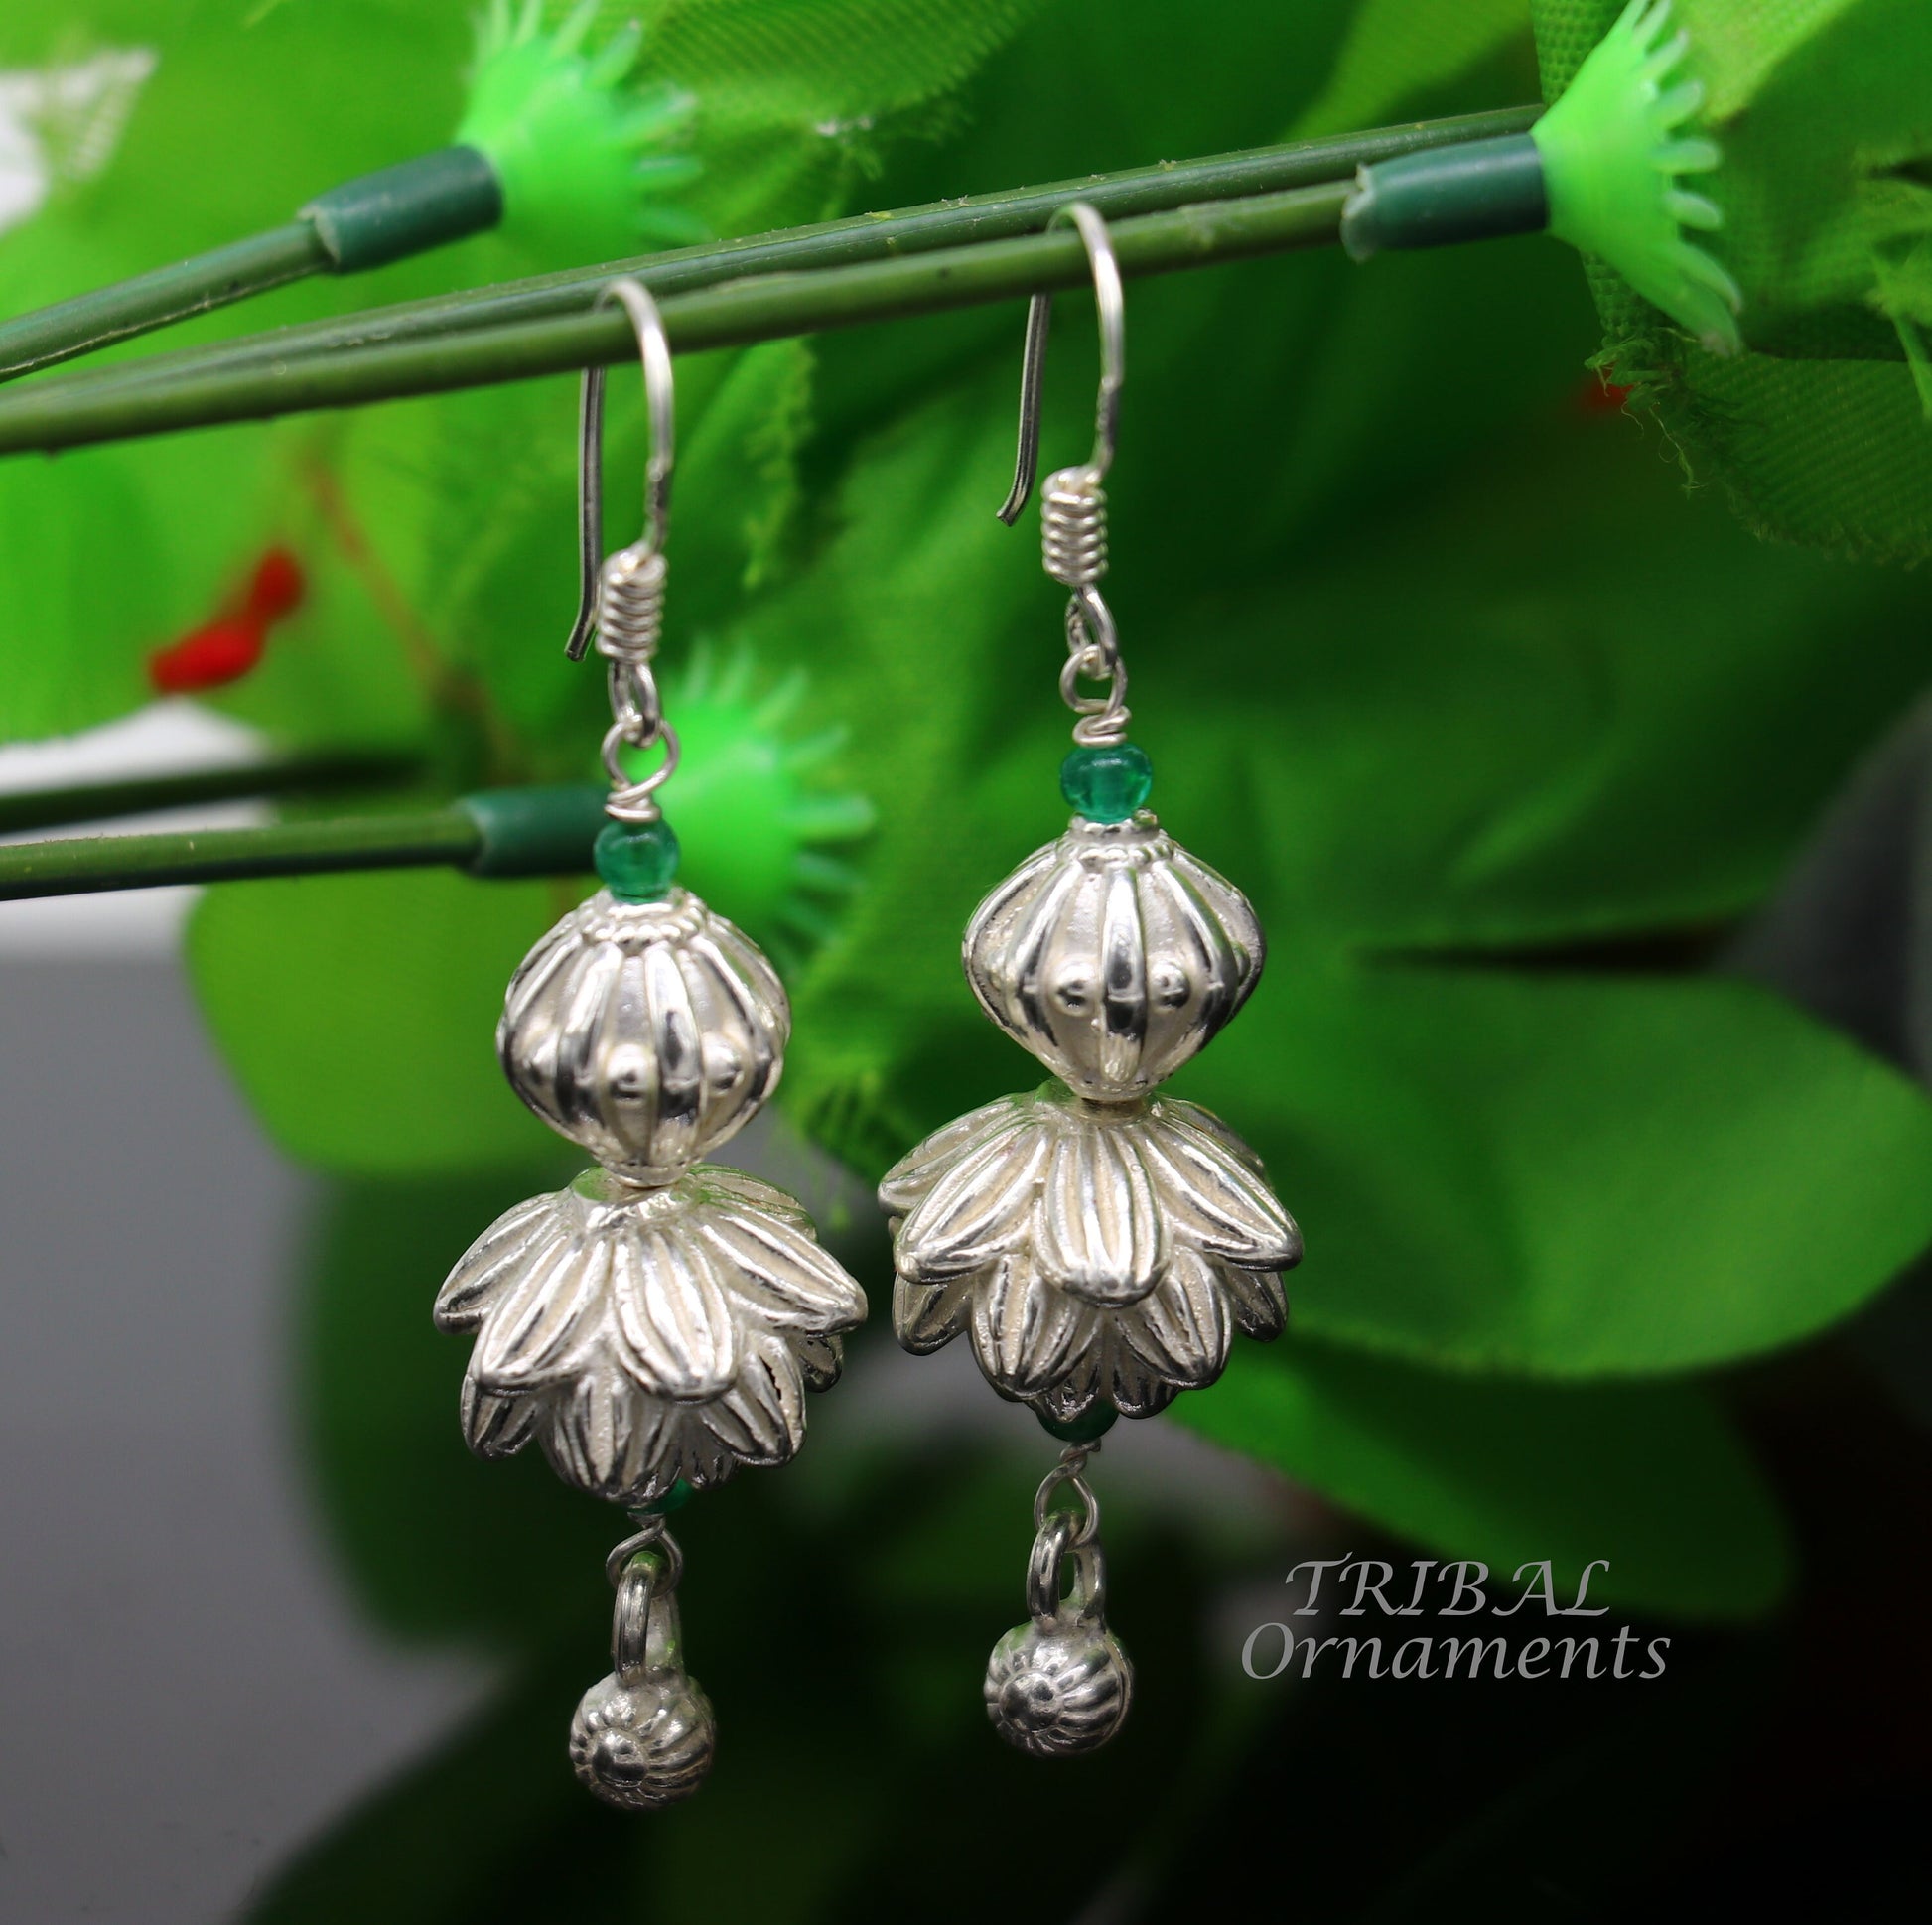 925 sterling silver handmade white finish hook earrings, fabulous hanging drop dangle earrings tribal ethnic jewelry from India s1087 - TRIBAL ORNAMENTS